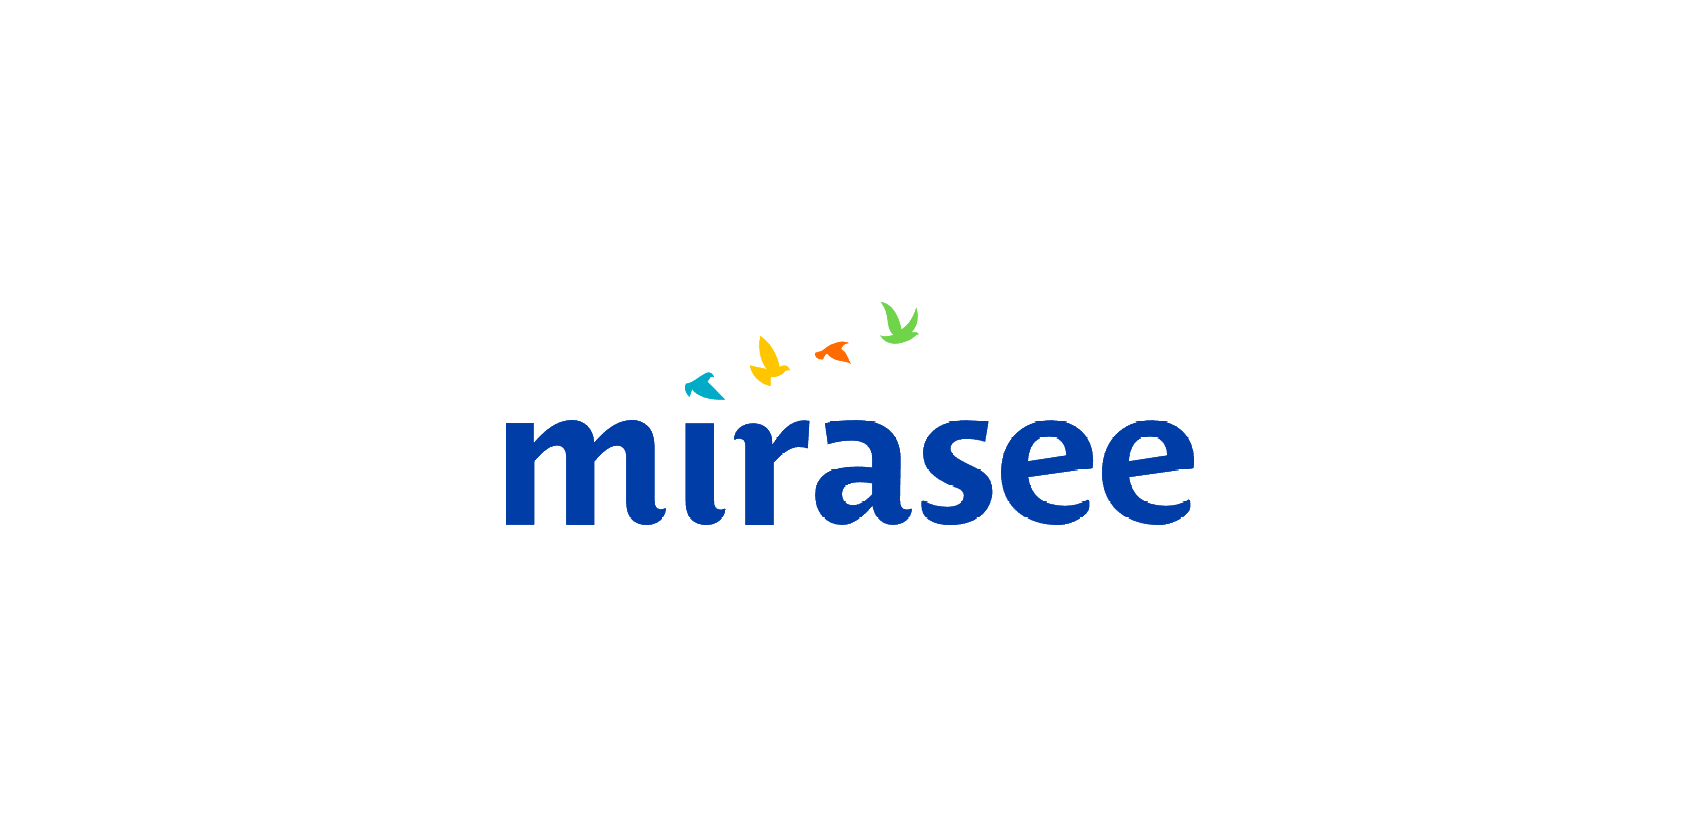 Build a Profitable and Impactful Business - Mirasee